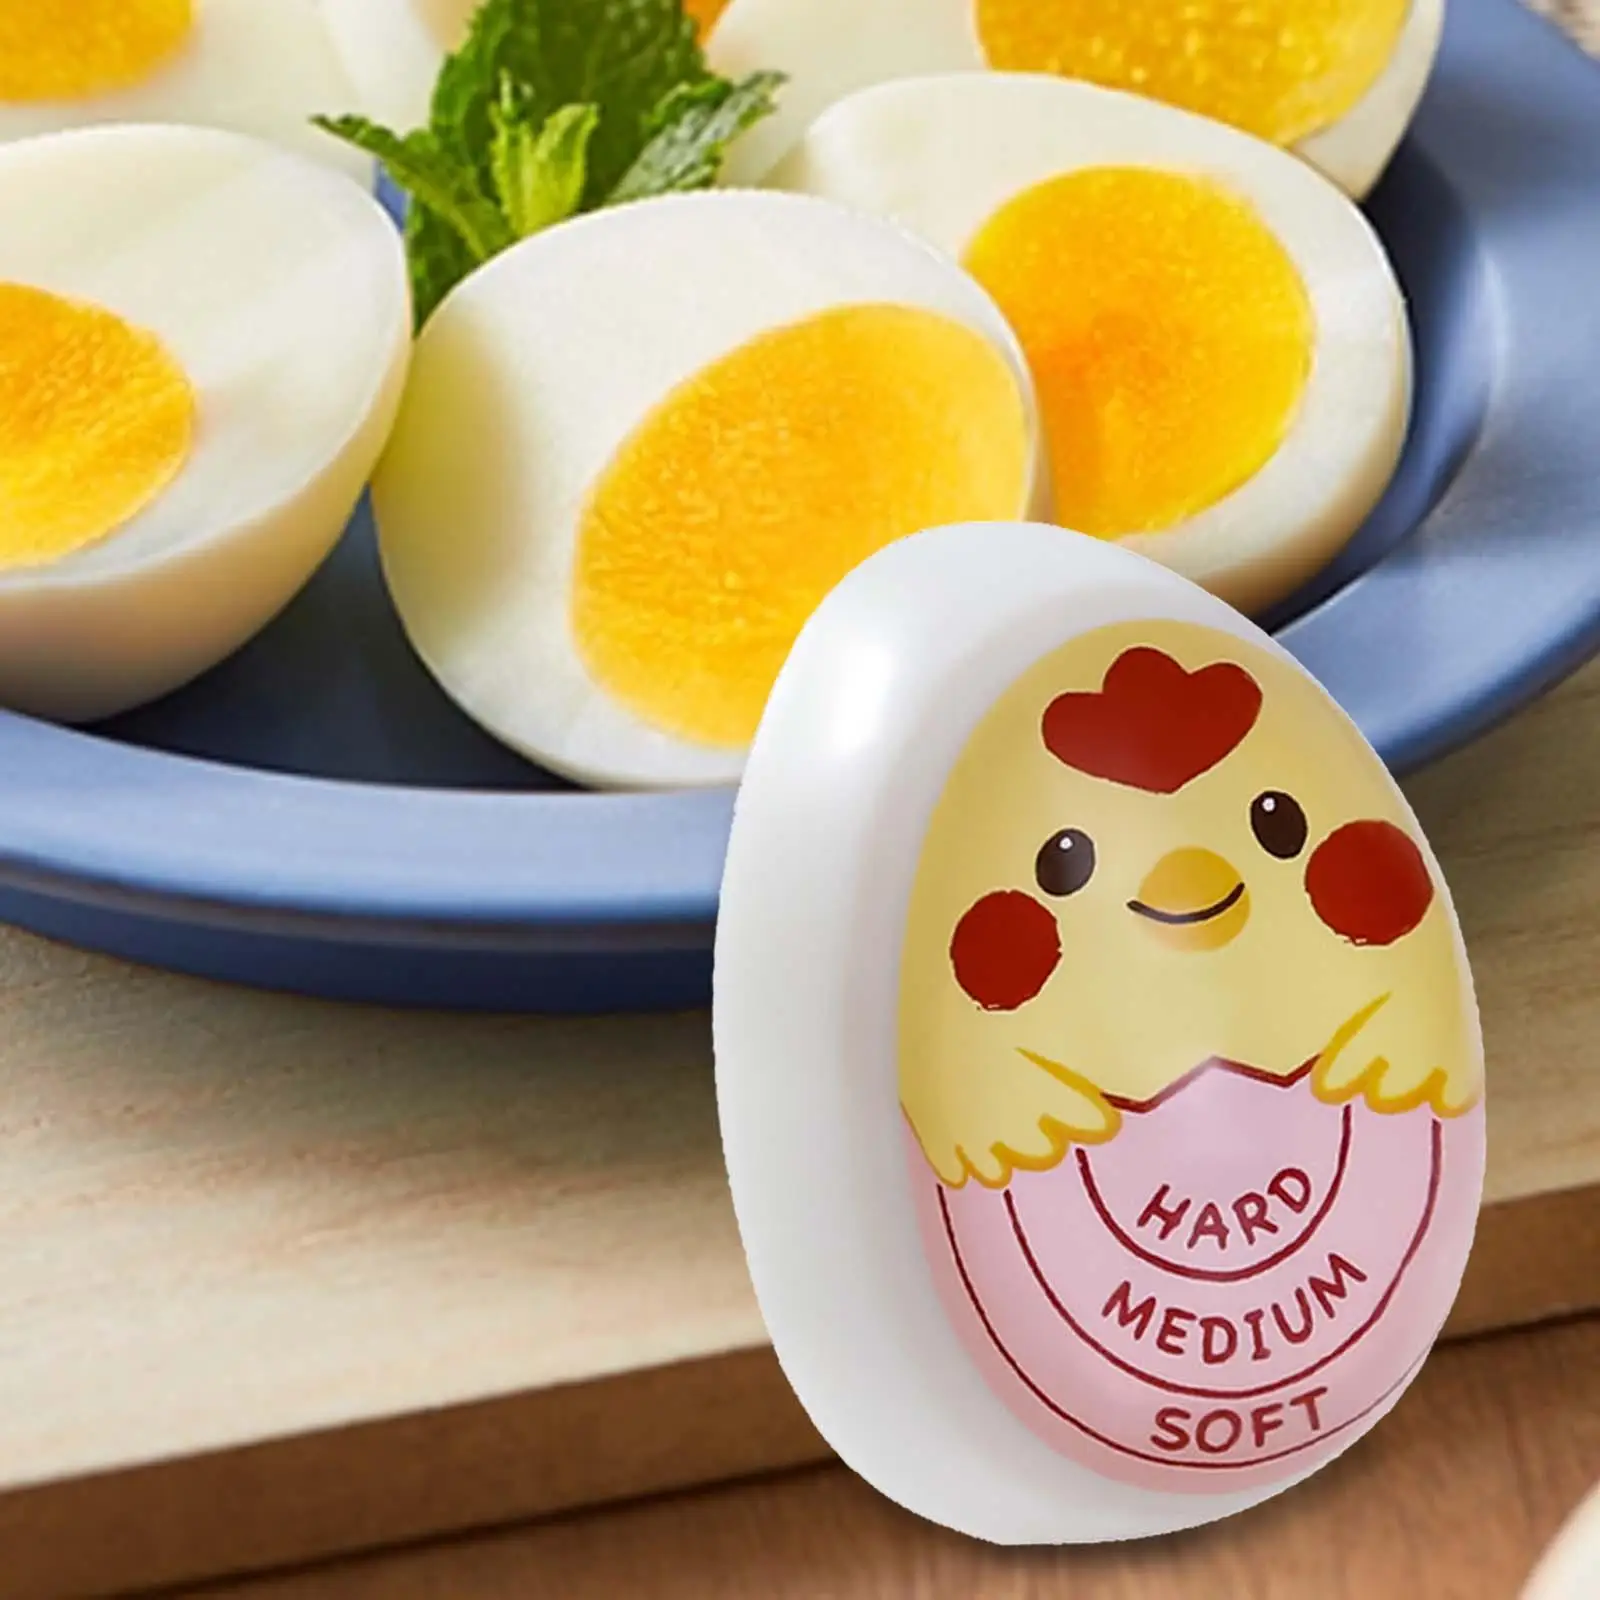 Egg Timer Colour Changing Easy to Read Display Egg Cooked Degree for Kitchen